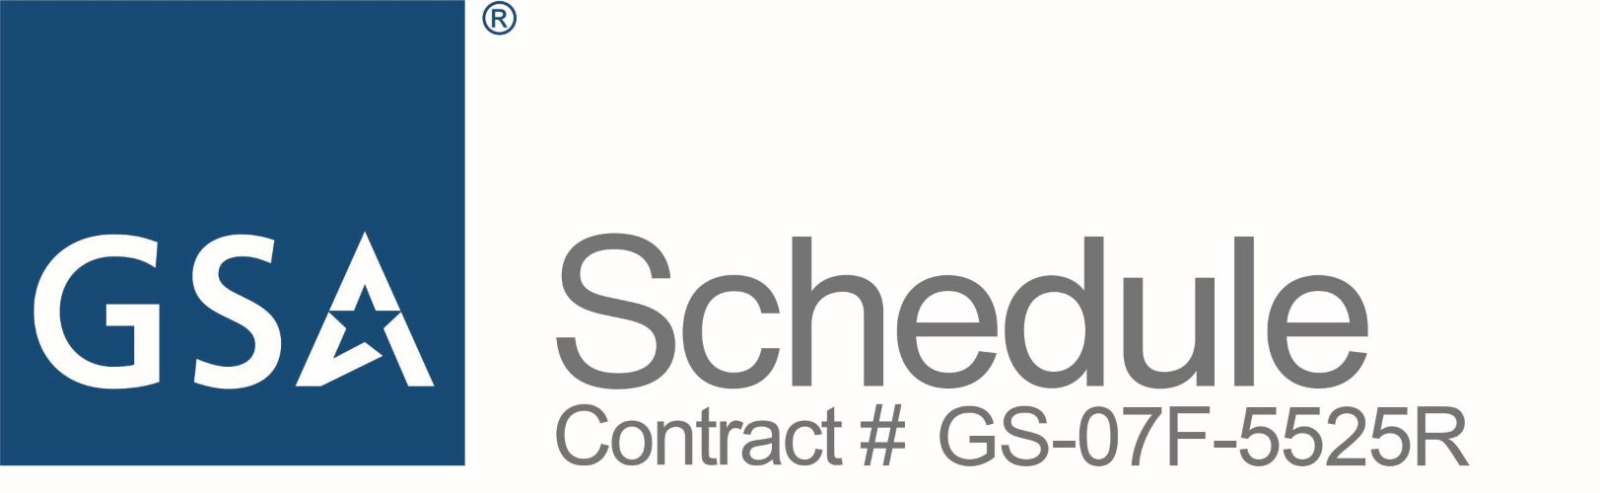 GSA schedule logo with contract #GS-0F-5525R.